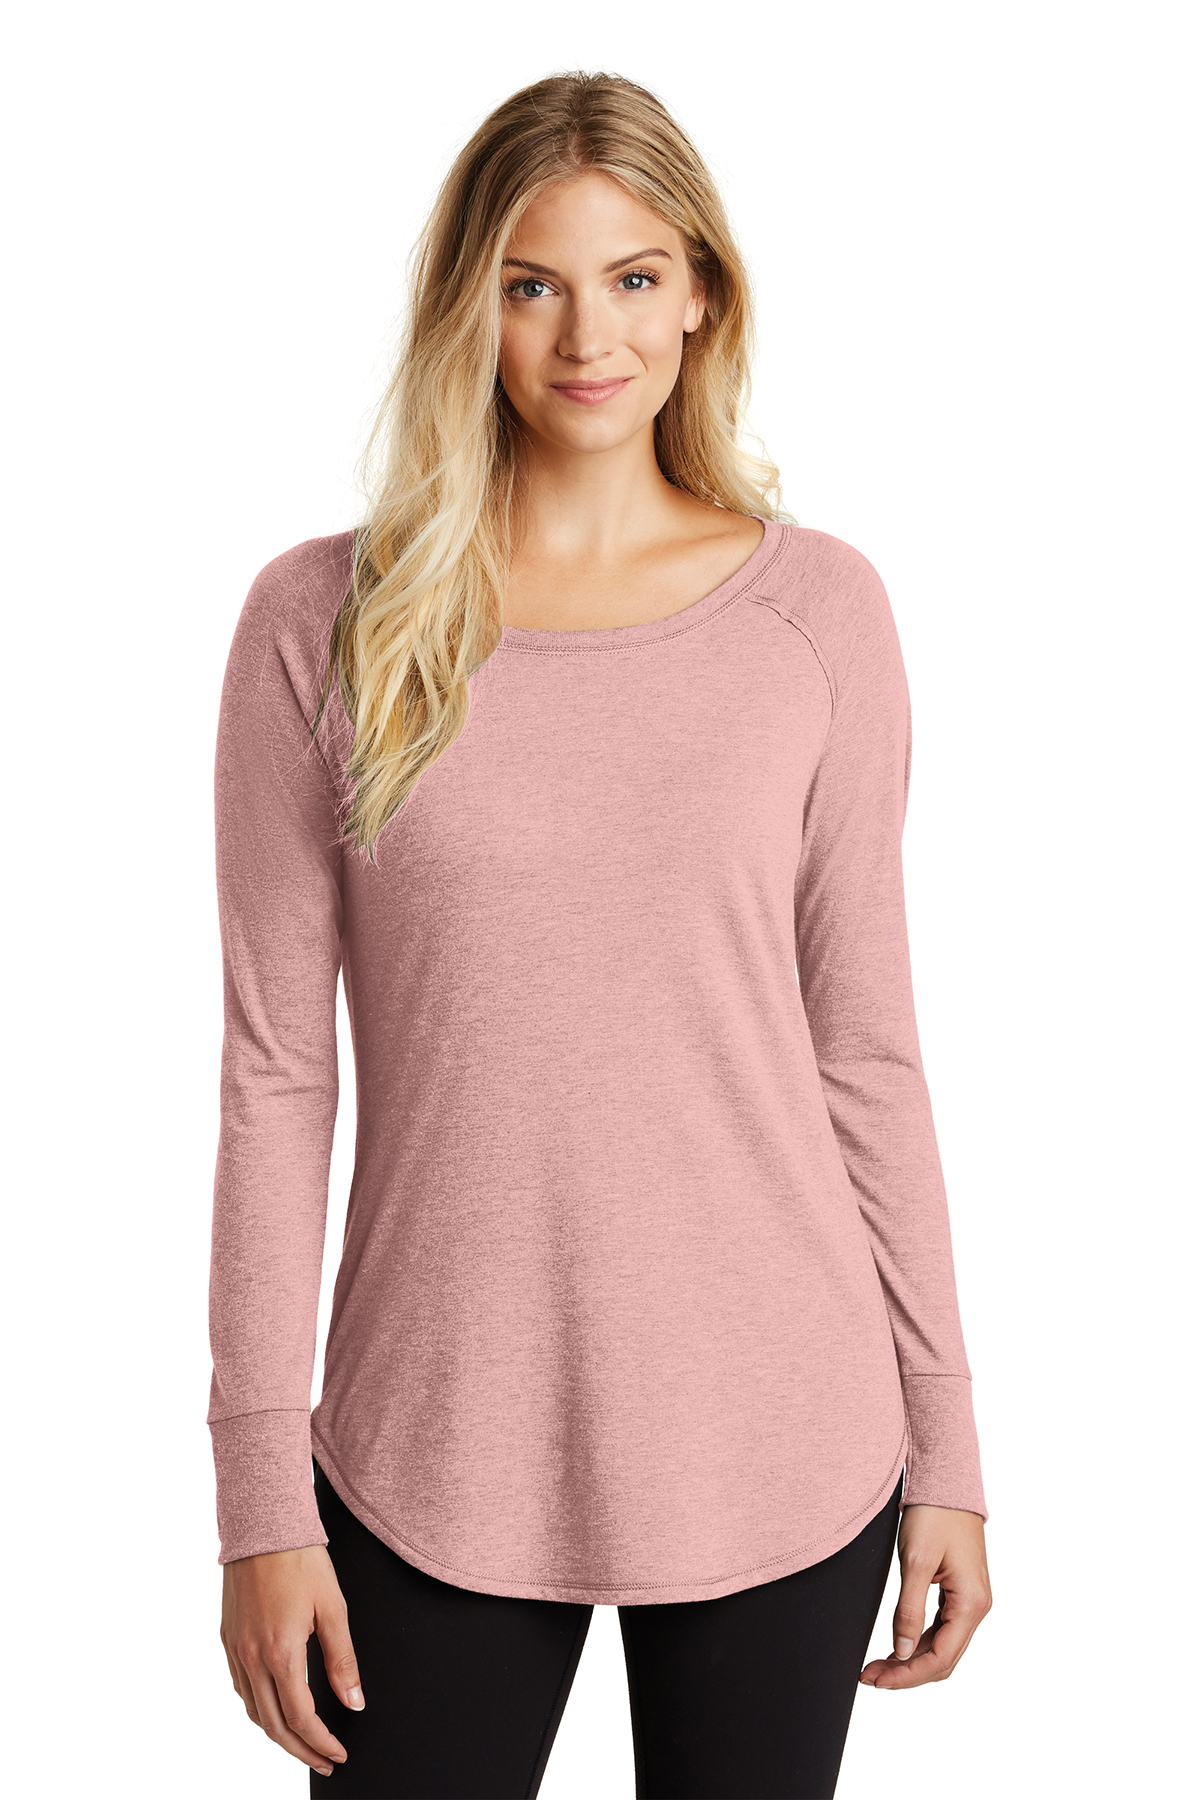 District DT132L - Ladies Perfect Tri Long Sleeve Tunic